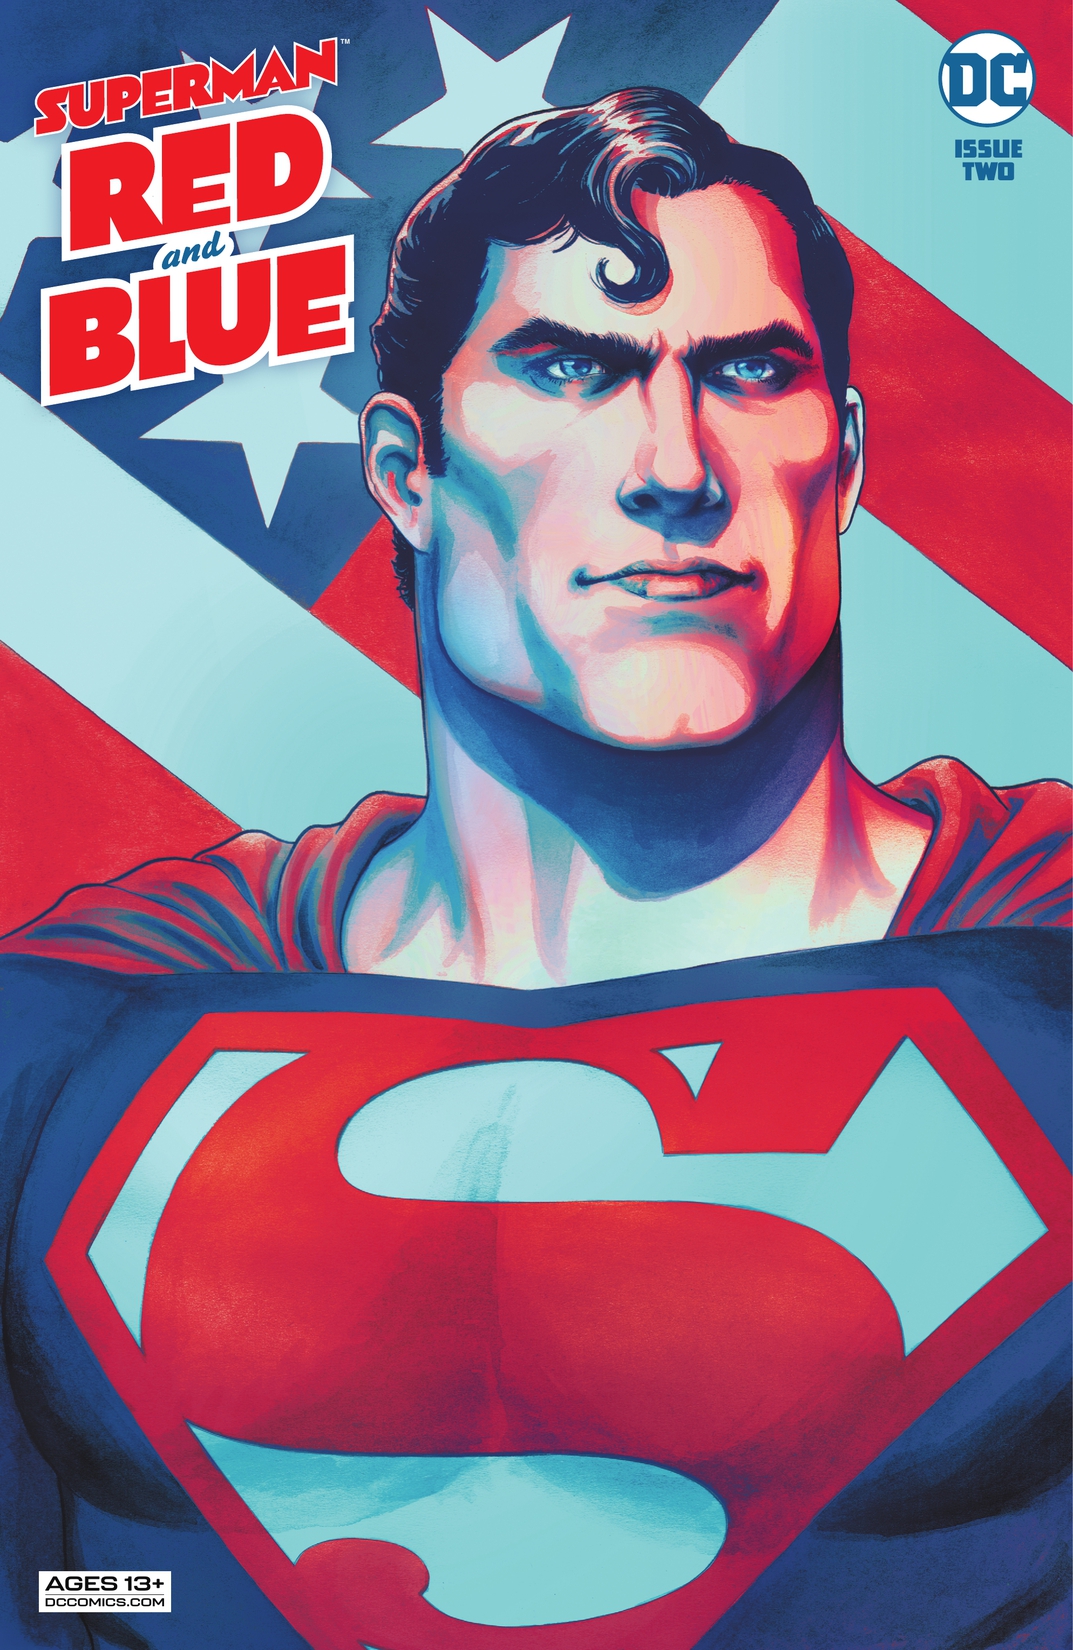 Superman Red & Blue #2 preview images